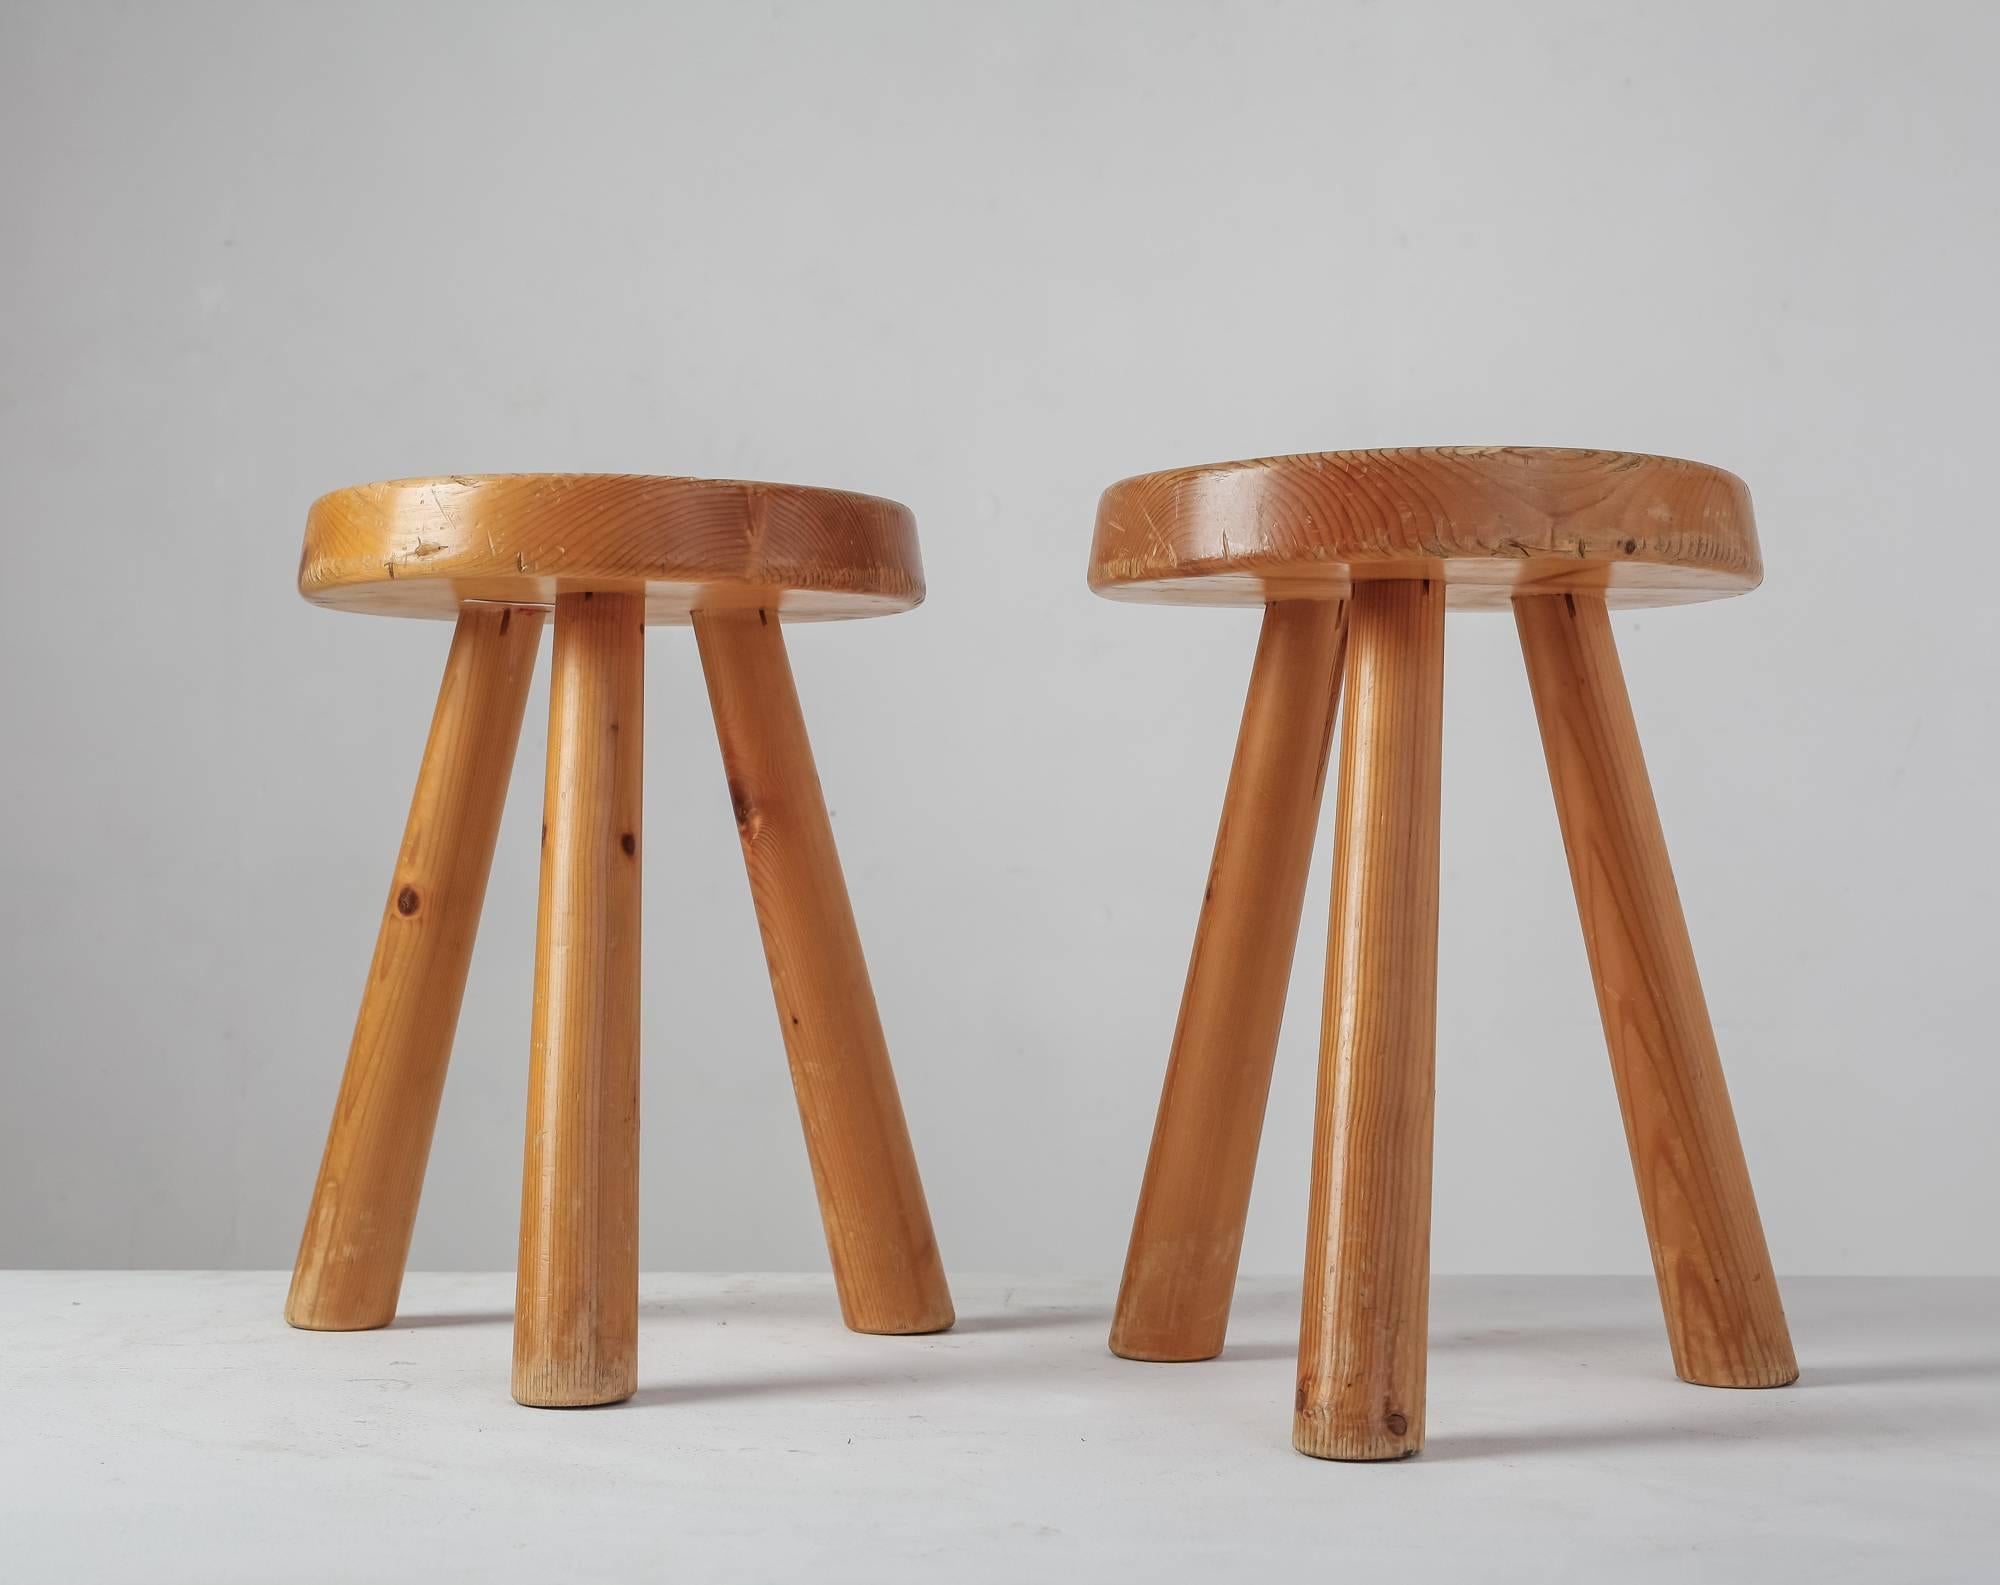 A pair of tripod pine Charlotte Perriand stools with a round seating with a diameter of 32 cm (12.5